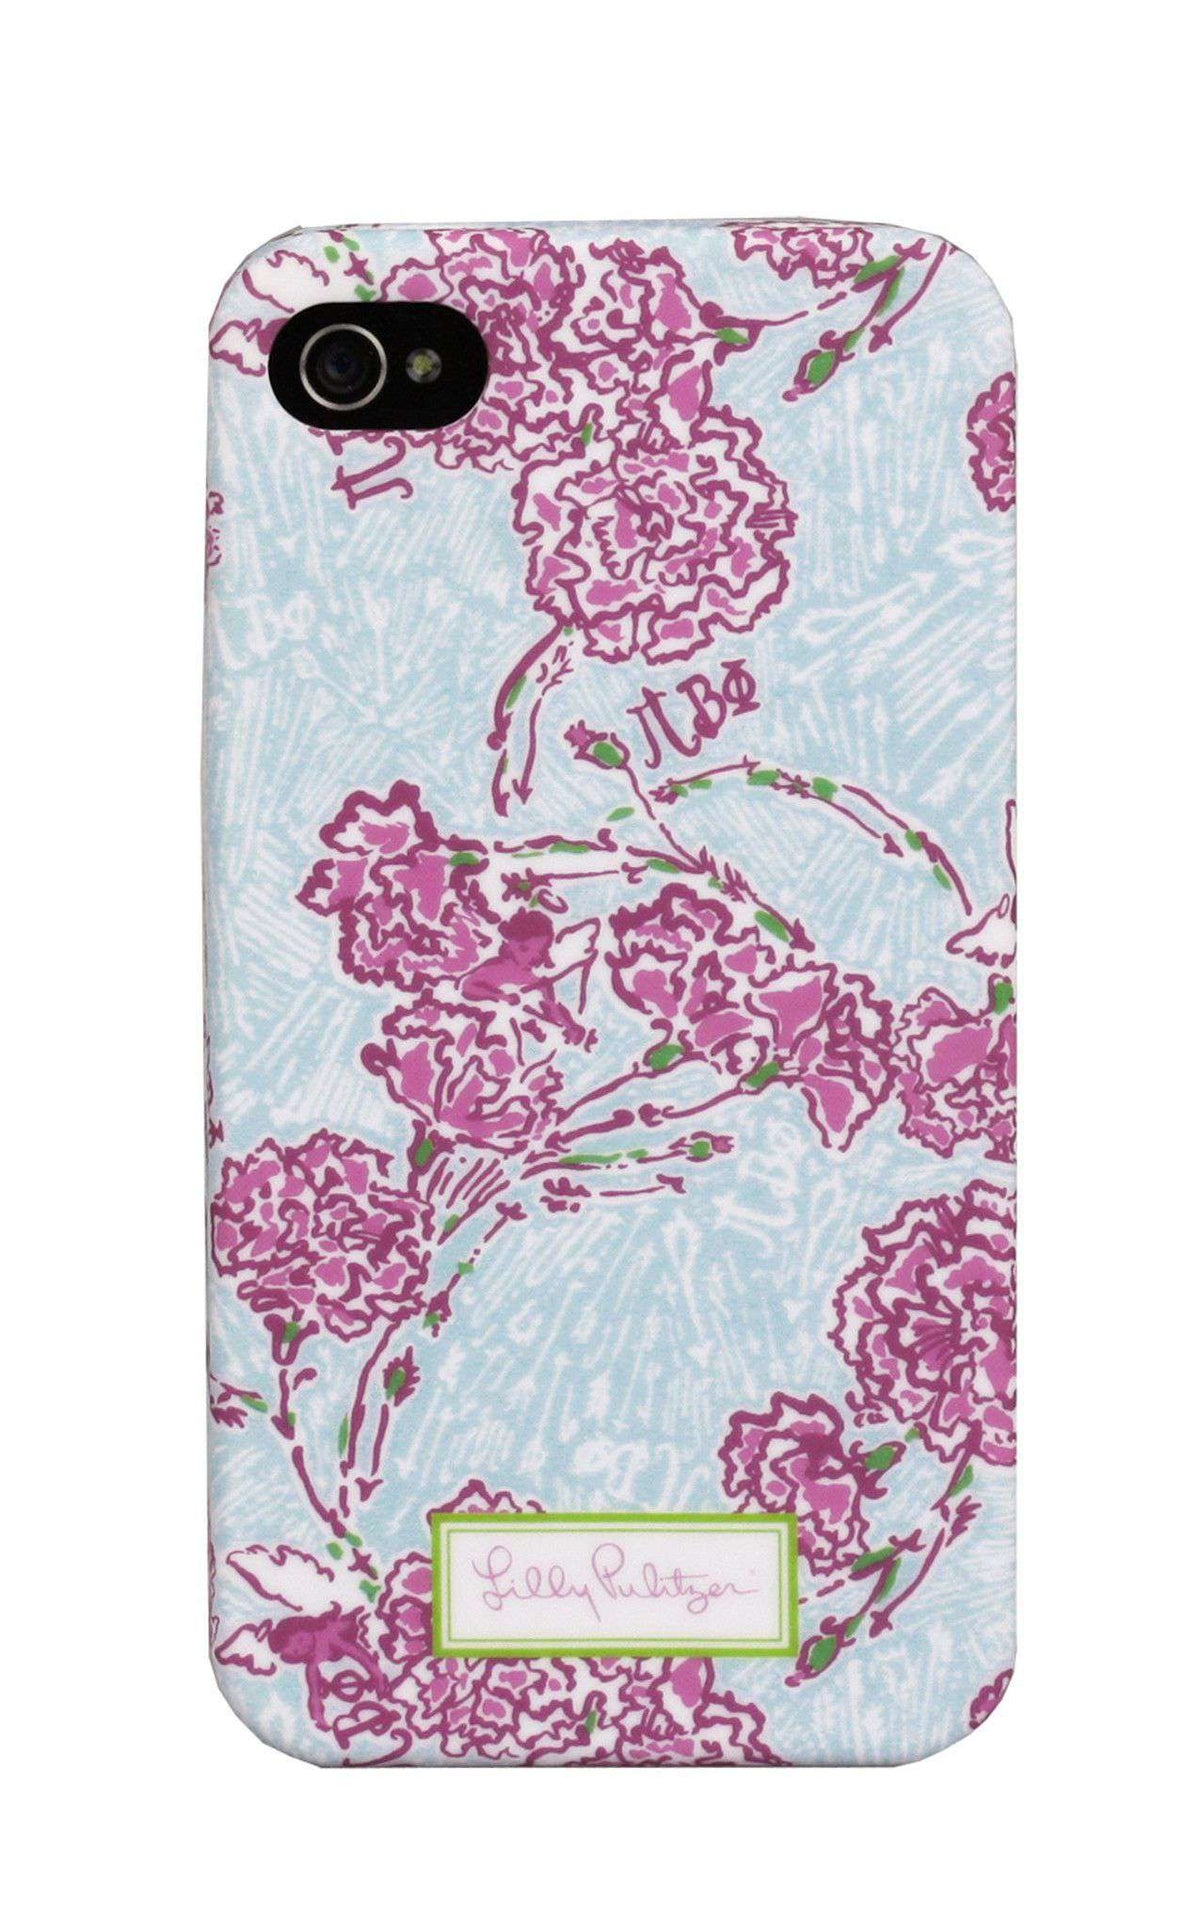 Pi Beta Phi iPhone 4/4s Cover by Lilly Pulitzer - Country Club Prep